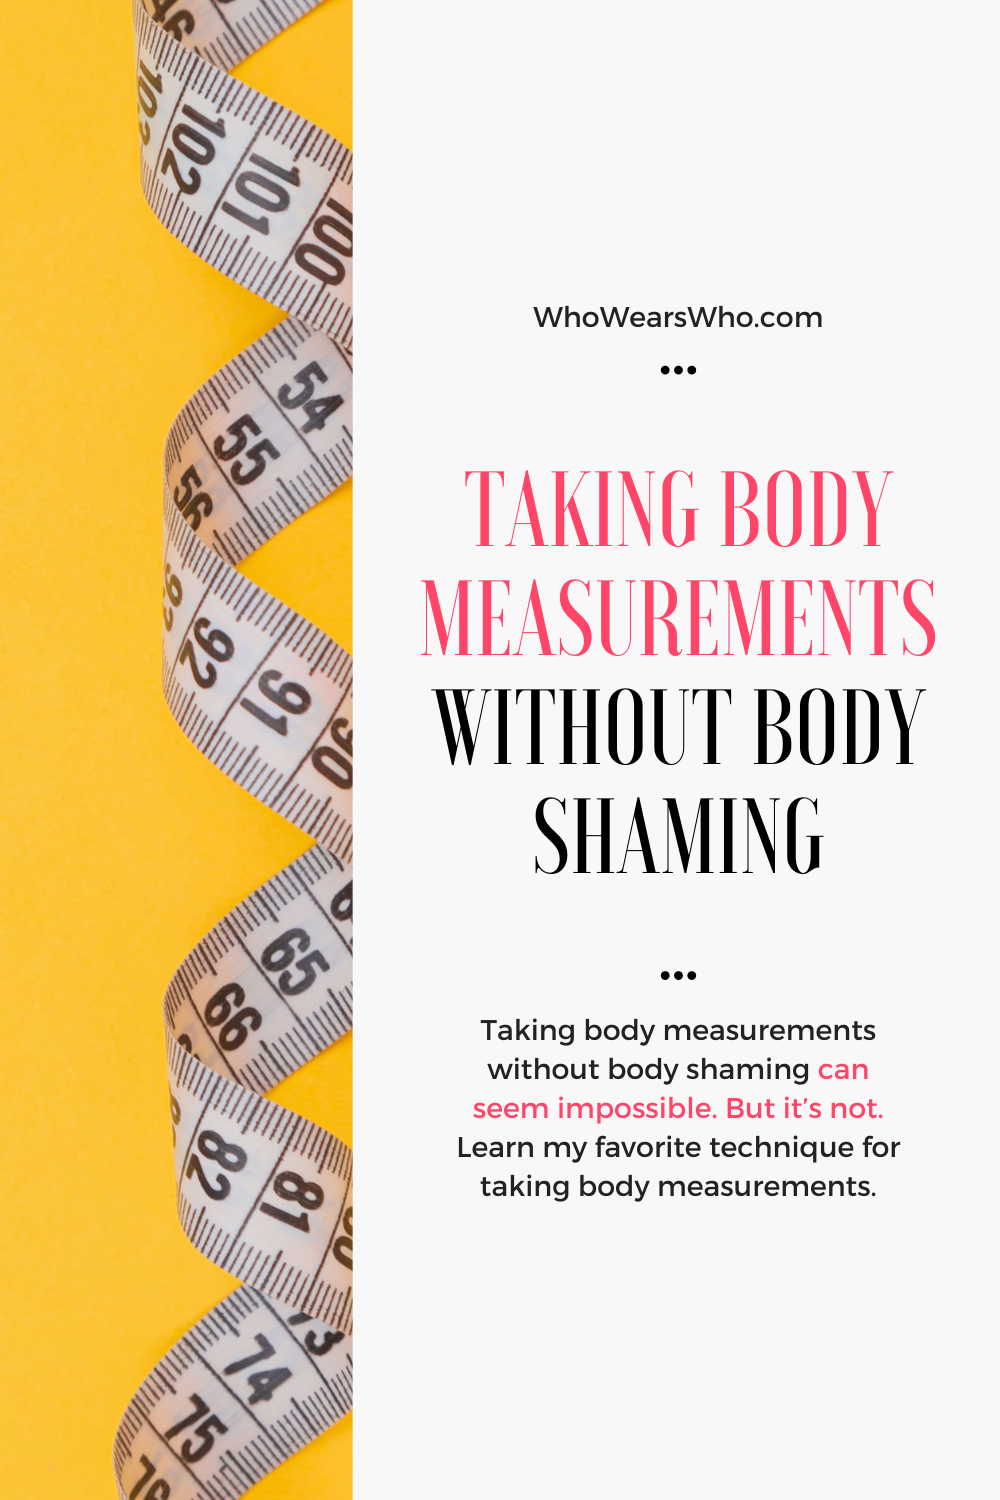 Taking body measurements without body shaming